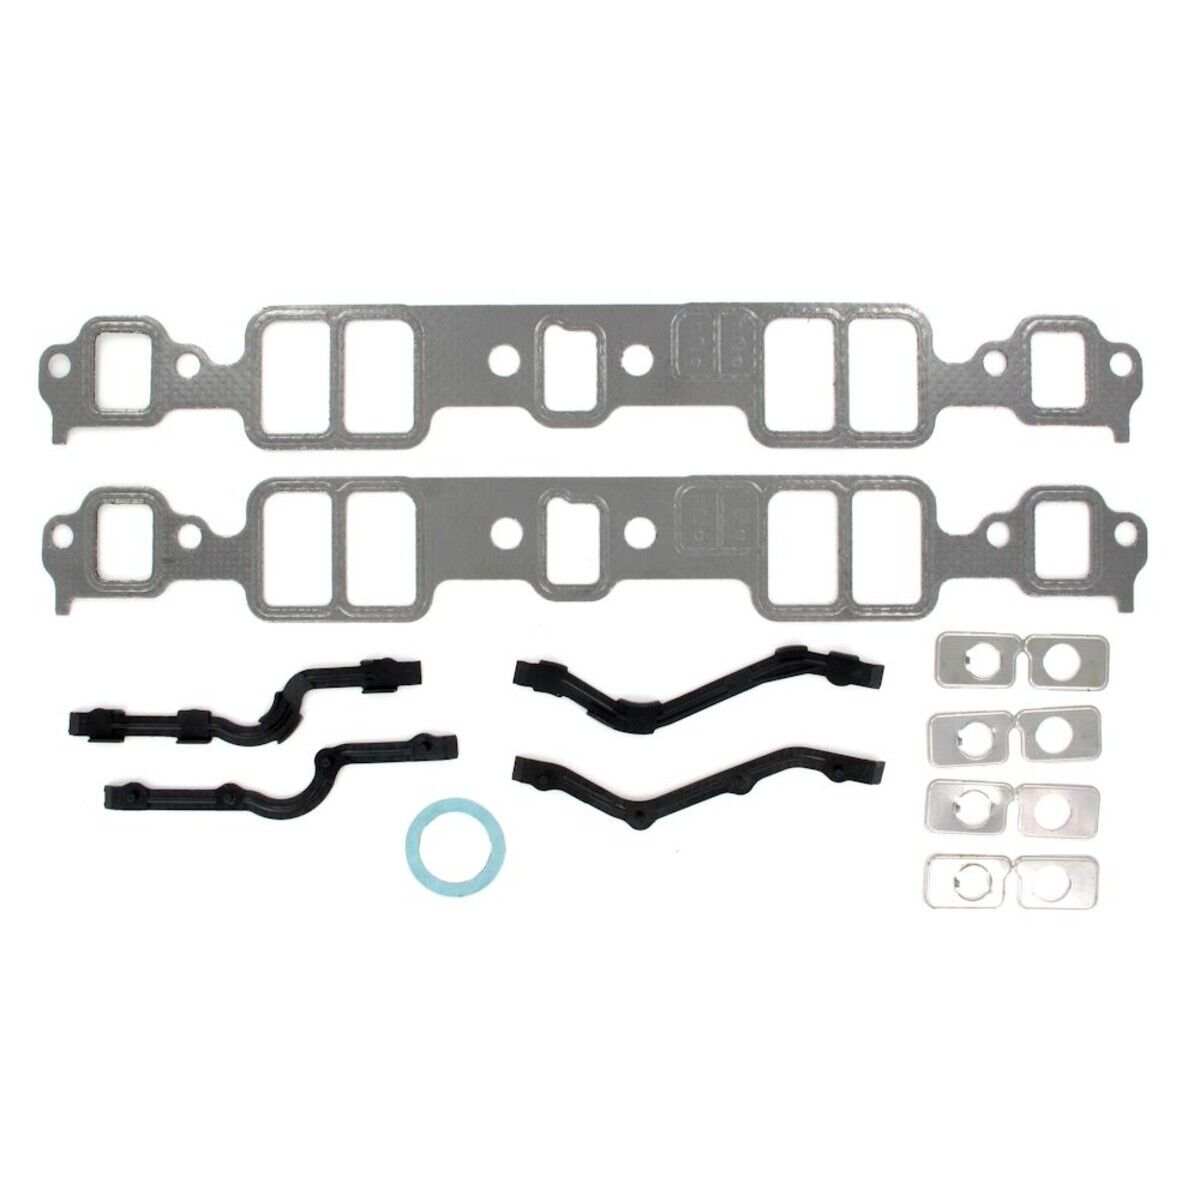 AMS3221 APEX Set Intake Manifold Gaskets for Chevy Olds Express Van Suburban